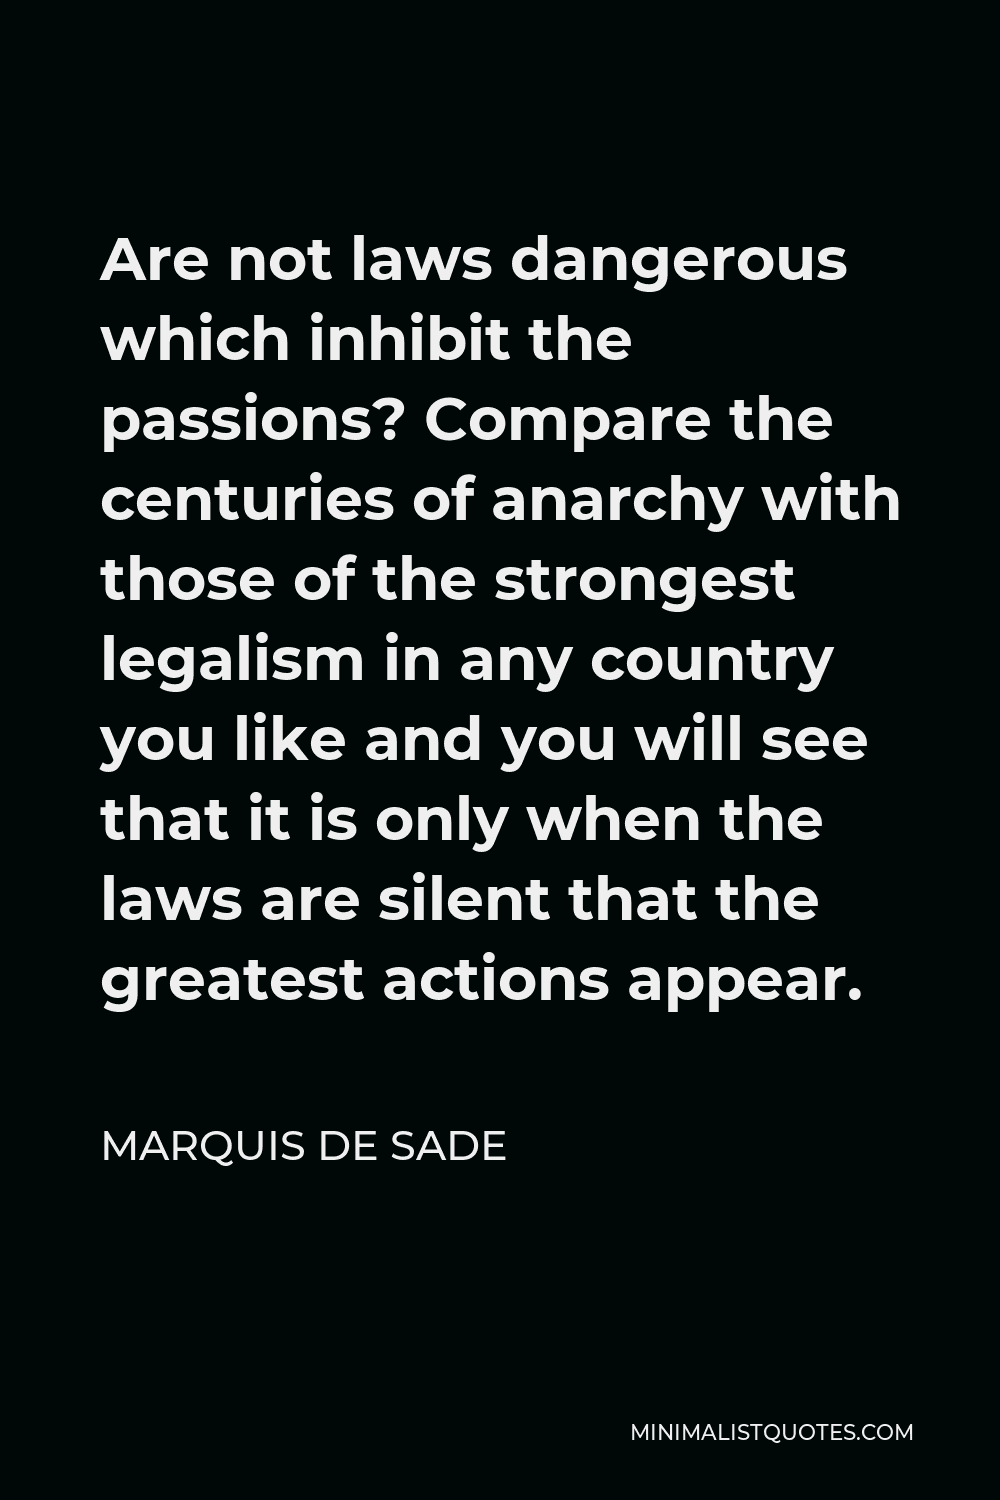 Marquis de Sade Quote - Are not laws dangerous which inhibit the passions? Compare the centuries of anarchy with those of the strongest legalism in any country you like and you will see that it is only when the laws are silent that the greatest actions appear.